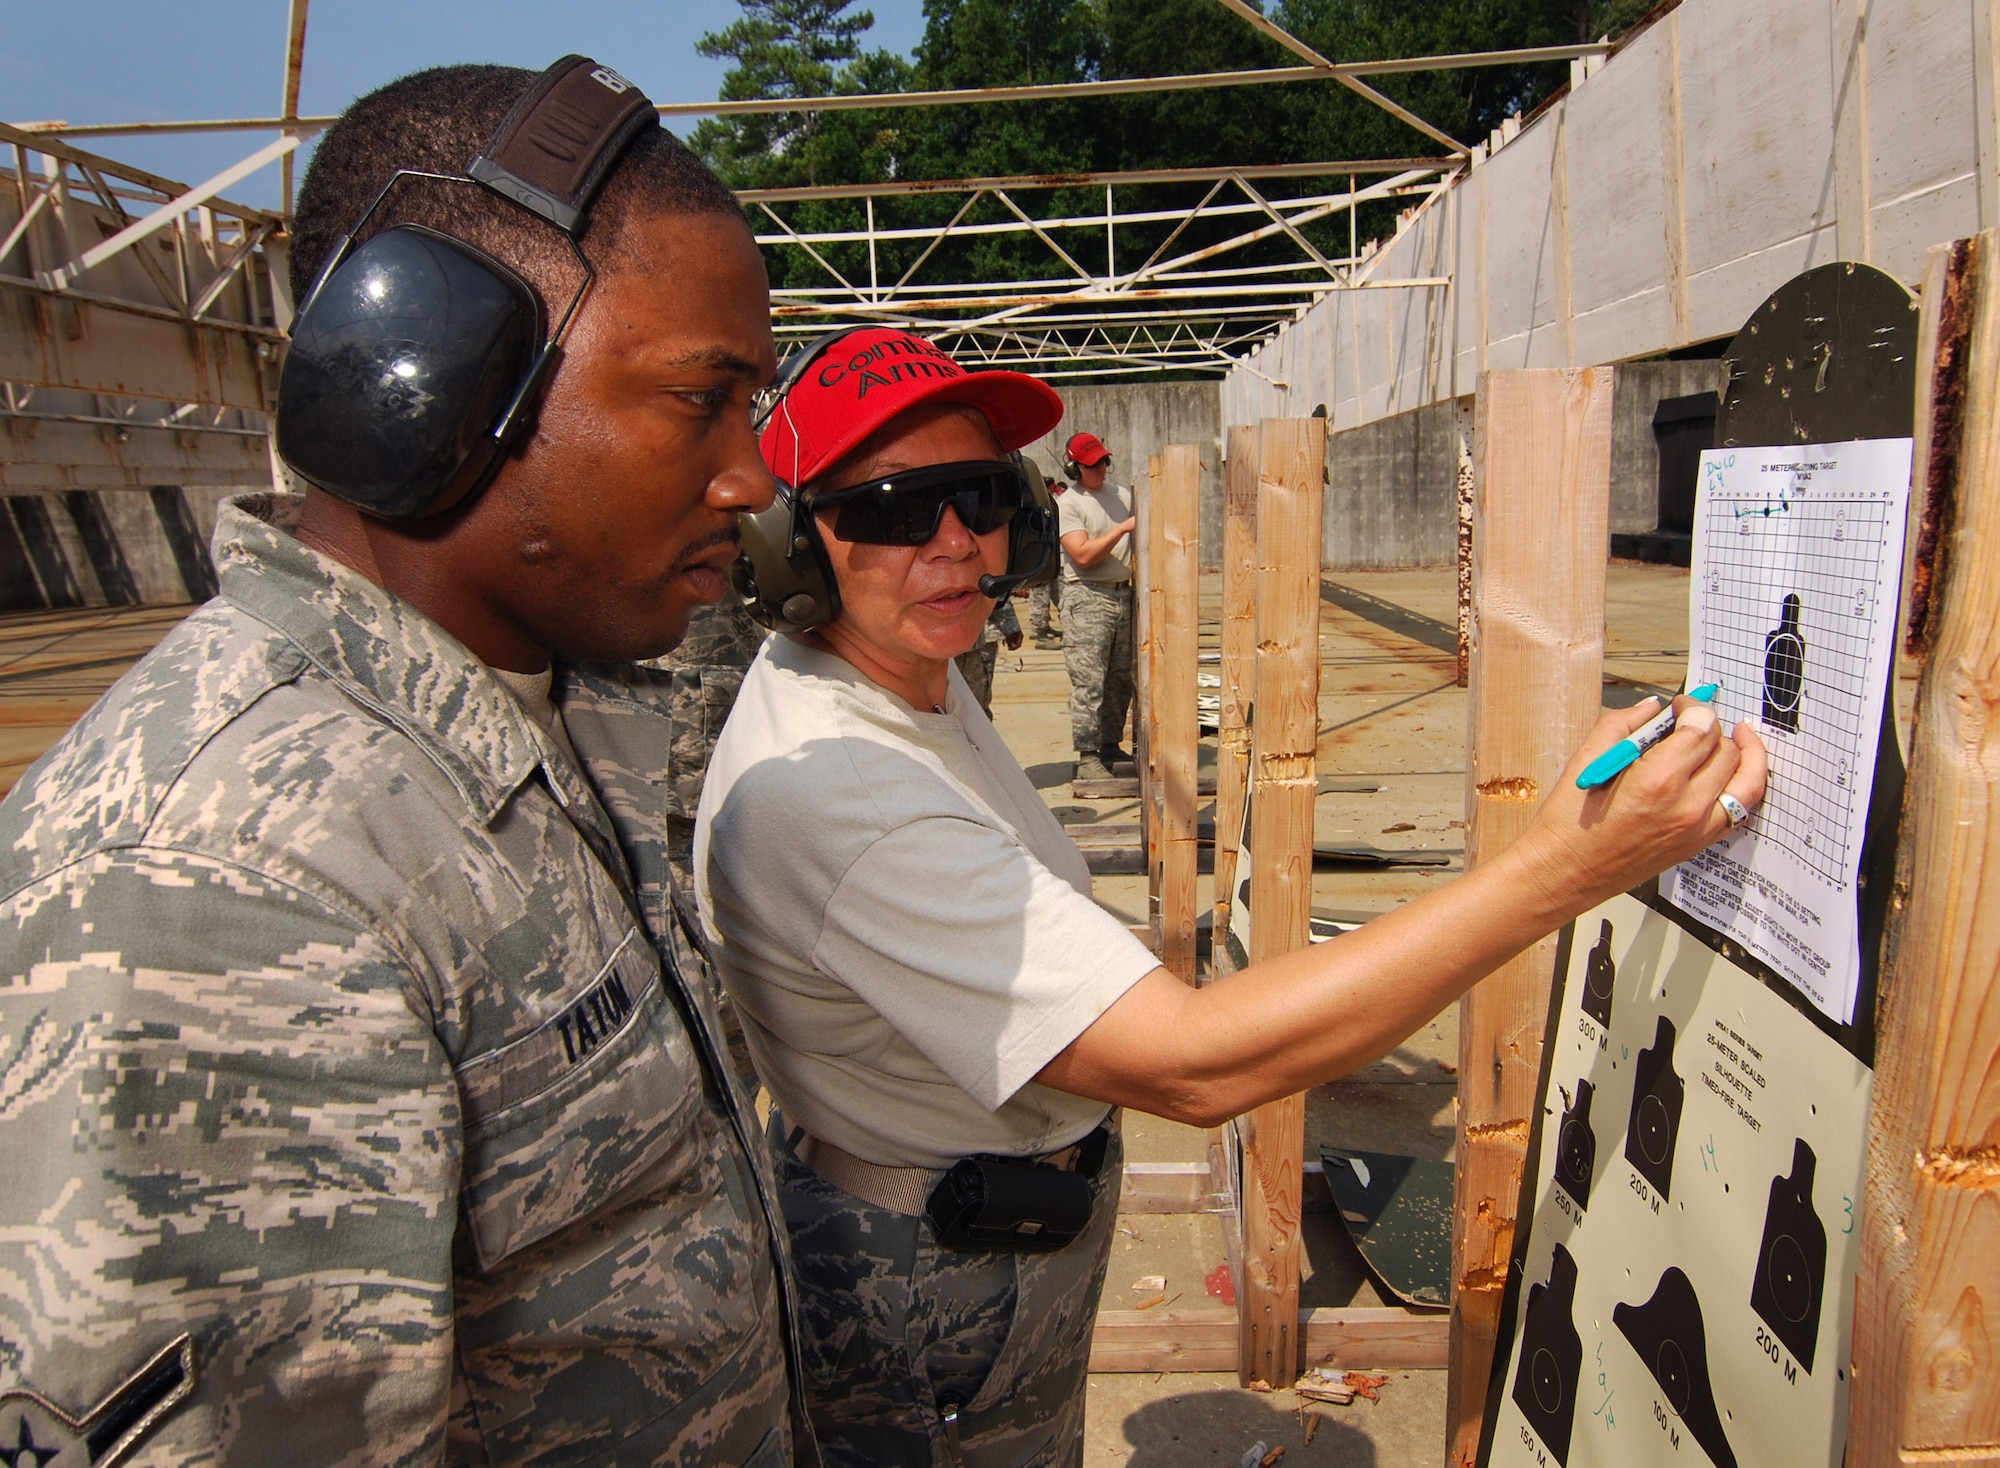 Airman Clarence Tatum, 94th Security Forces Squadron, receives M-4 carbine sight correction instructions from Master Sgt. Elaine Bowman, also from the 94th Security Forces Squadron, at Dobbins Air Reserve Base during the monthly Unit Training Assembly, July 9.  94th Security Forces Combat Arms Training and Maintenance instructors conduct the training with several hours of classroom and firing range instruction ending with a qualification course of fire.  (U.S. Air Force photo/ Brad Fallin)